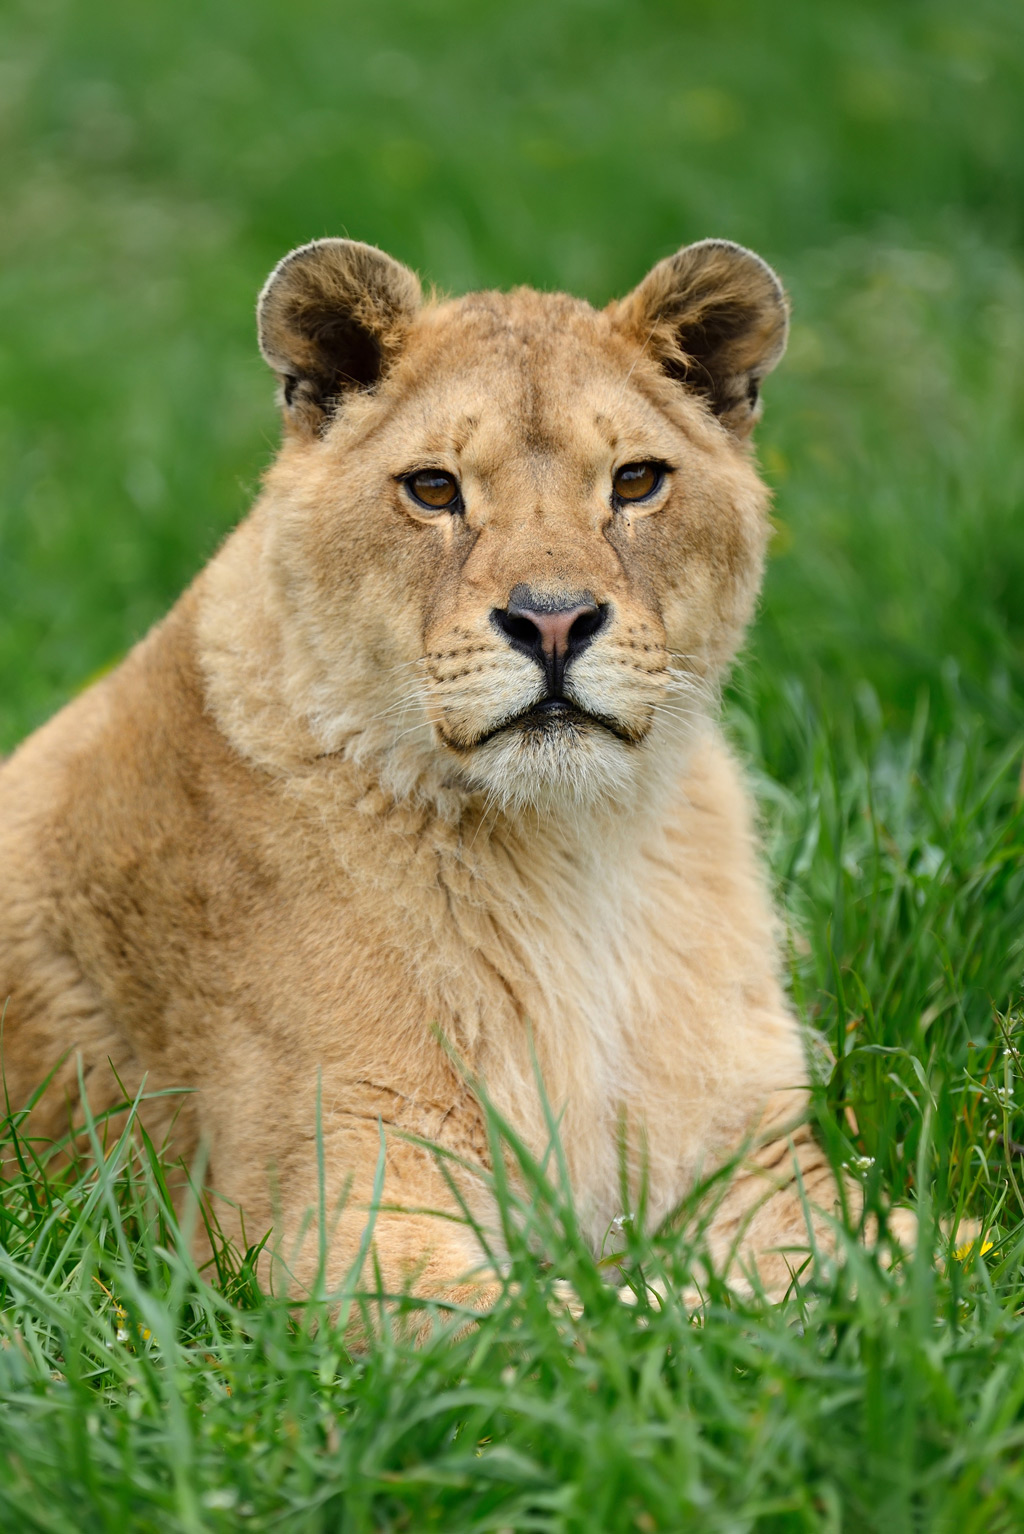 Lion sitting in a green grass